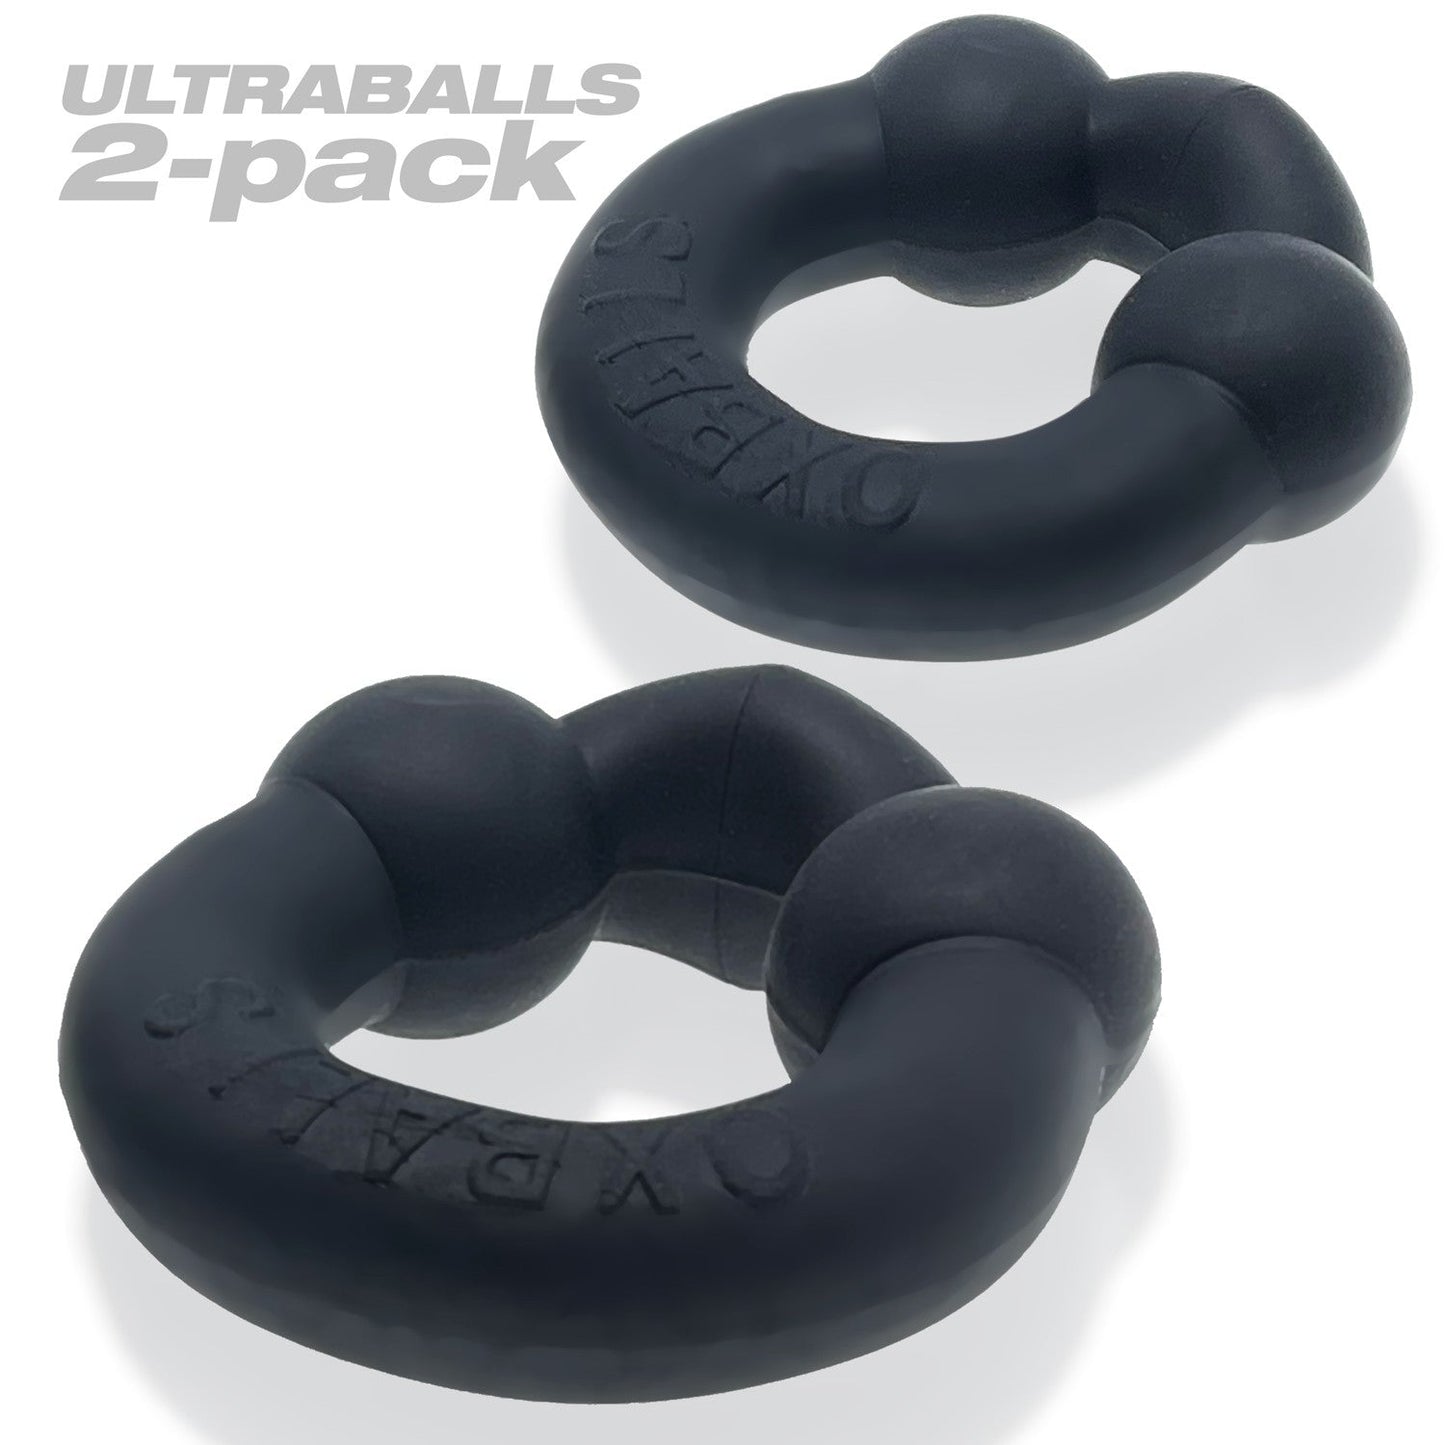 ULTRABALLS, 2-pack cockring - PLUS+SILICONE special edition - NIGHT